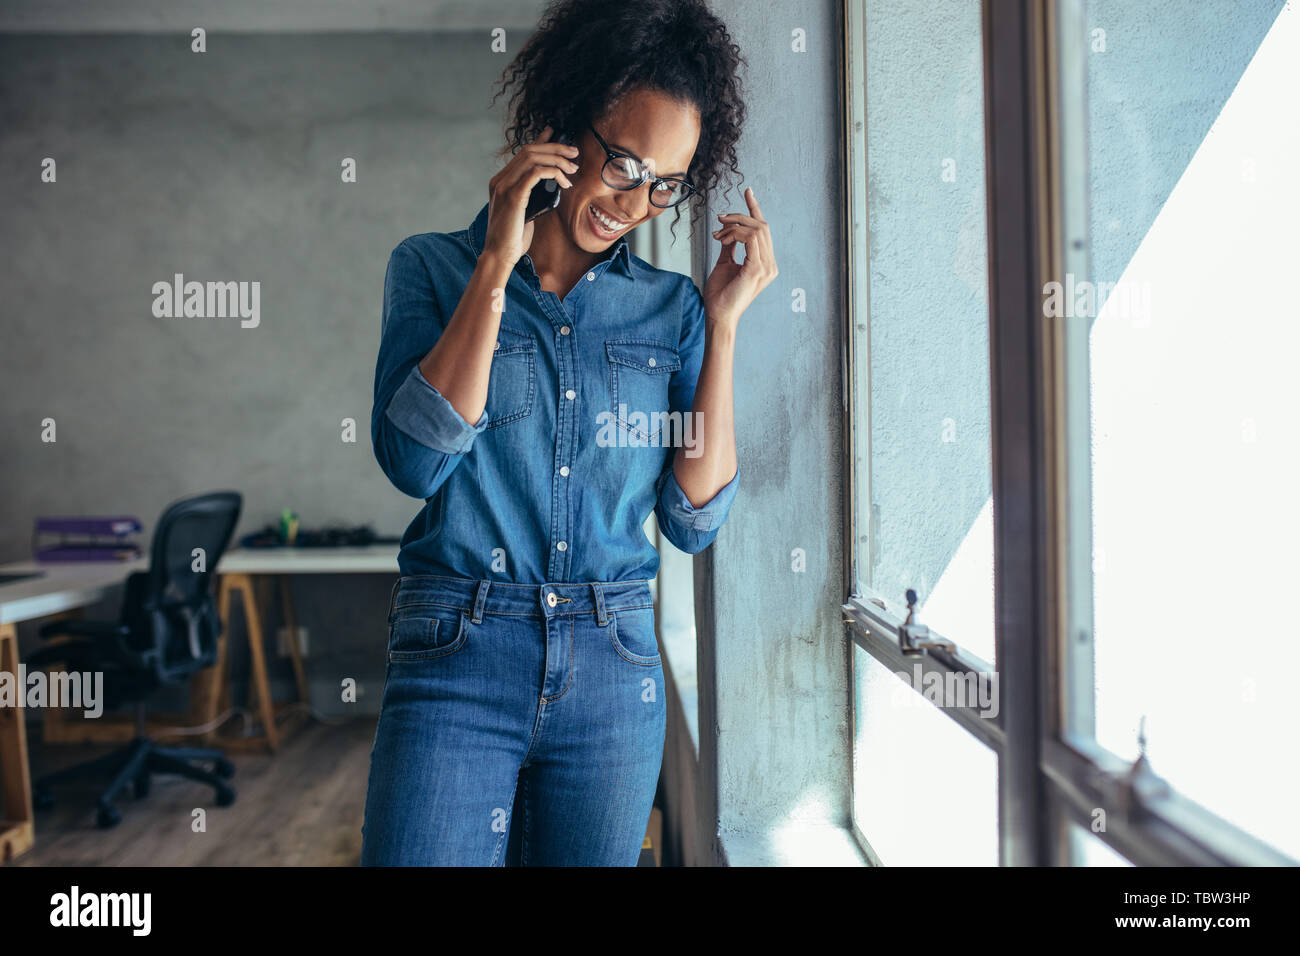 Businesswoman talking on mobile phone and smiling. Female entrepreneur standing by a window and talking over cell phone in office Stock Photo